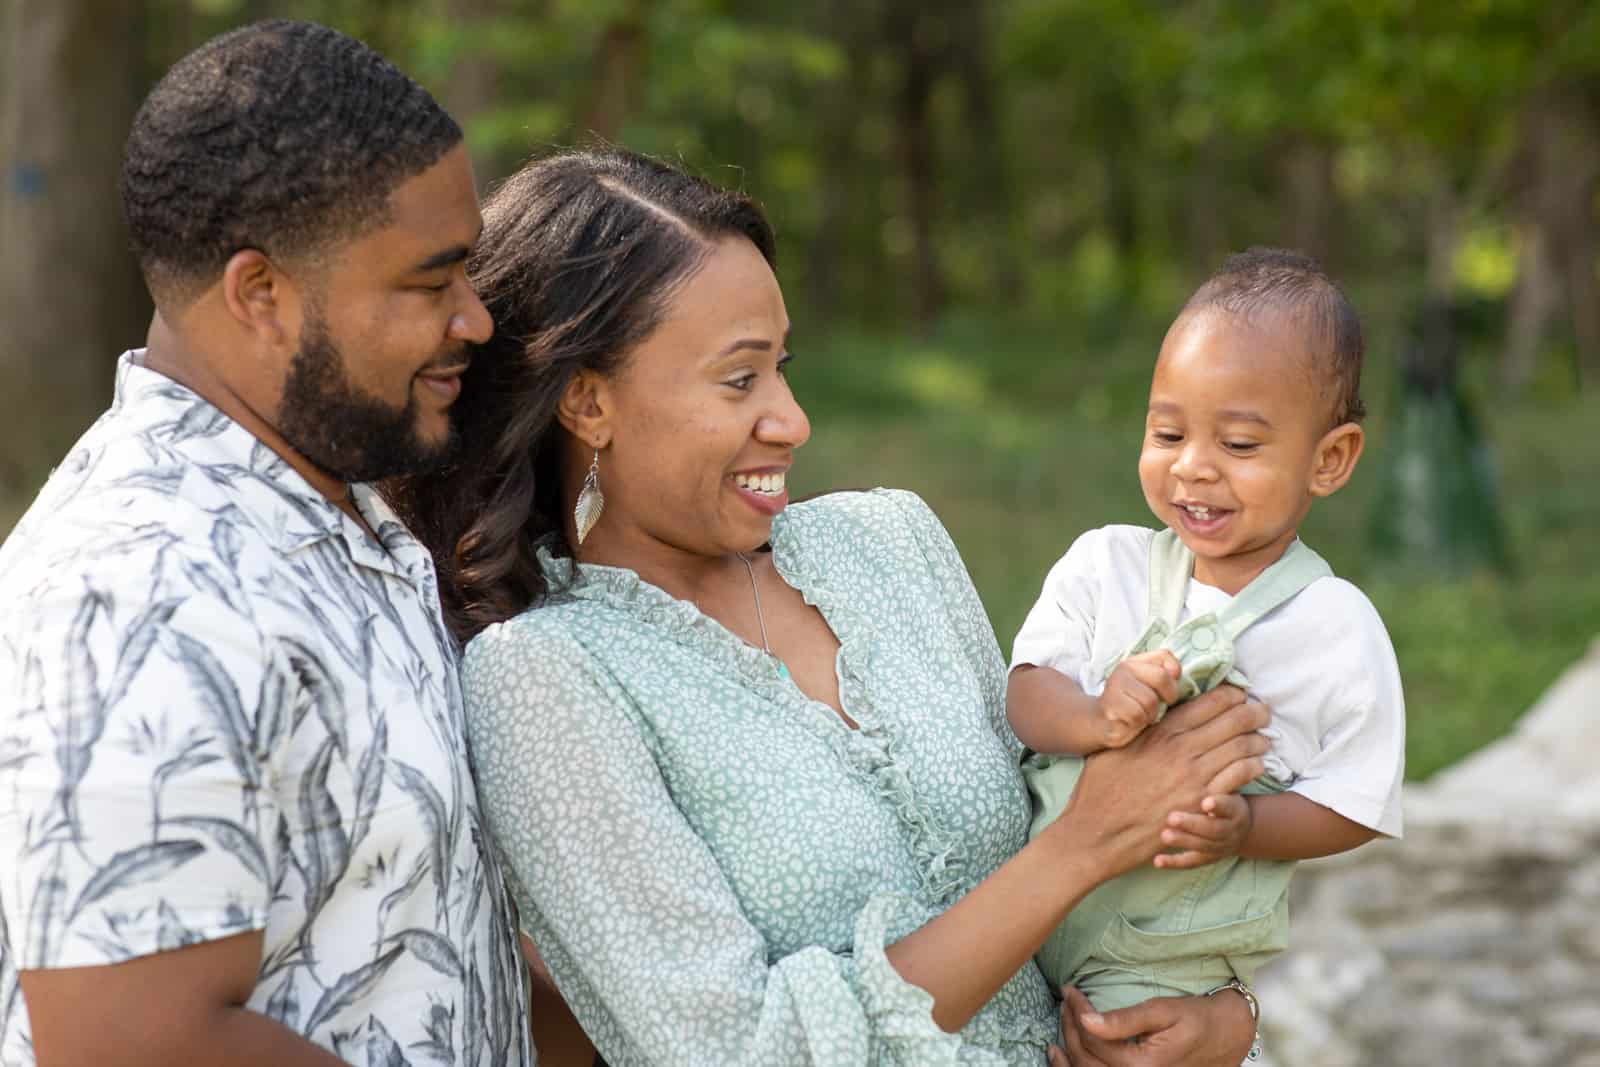 Black couple smiling and holding their one year old baby at the park.